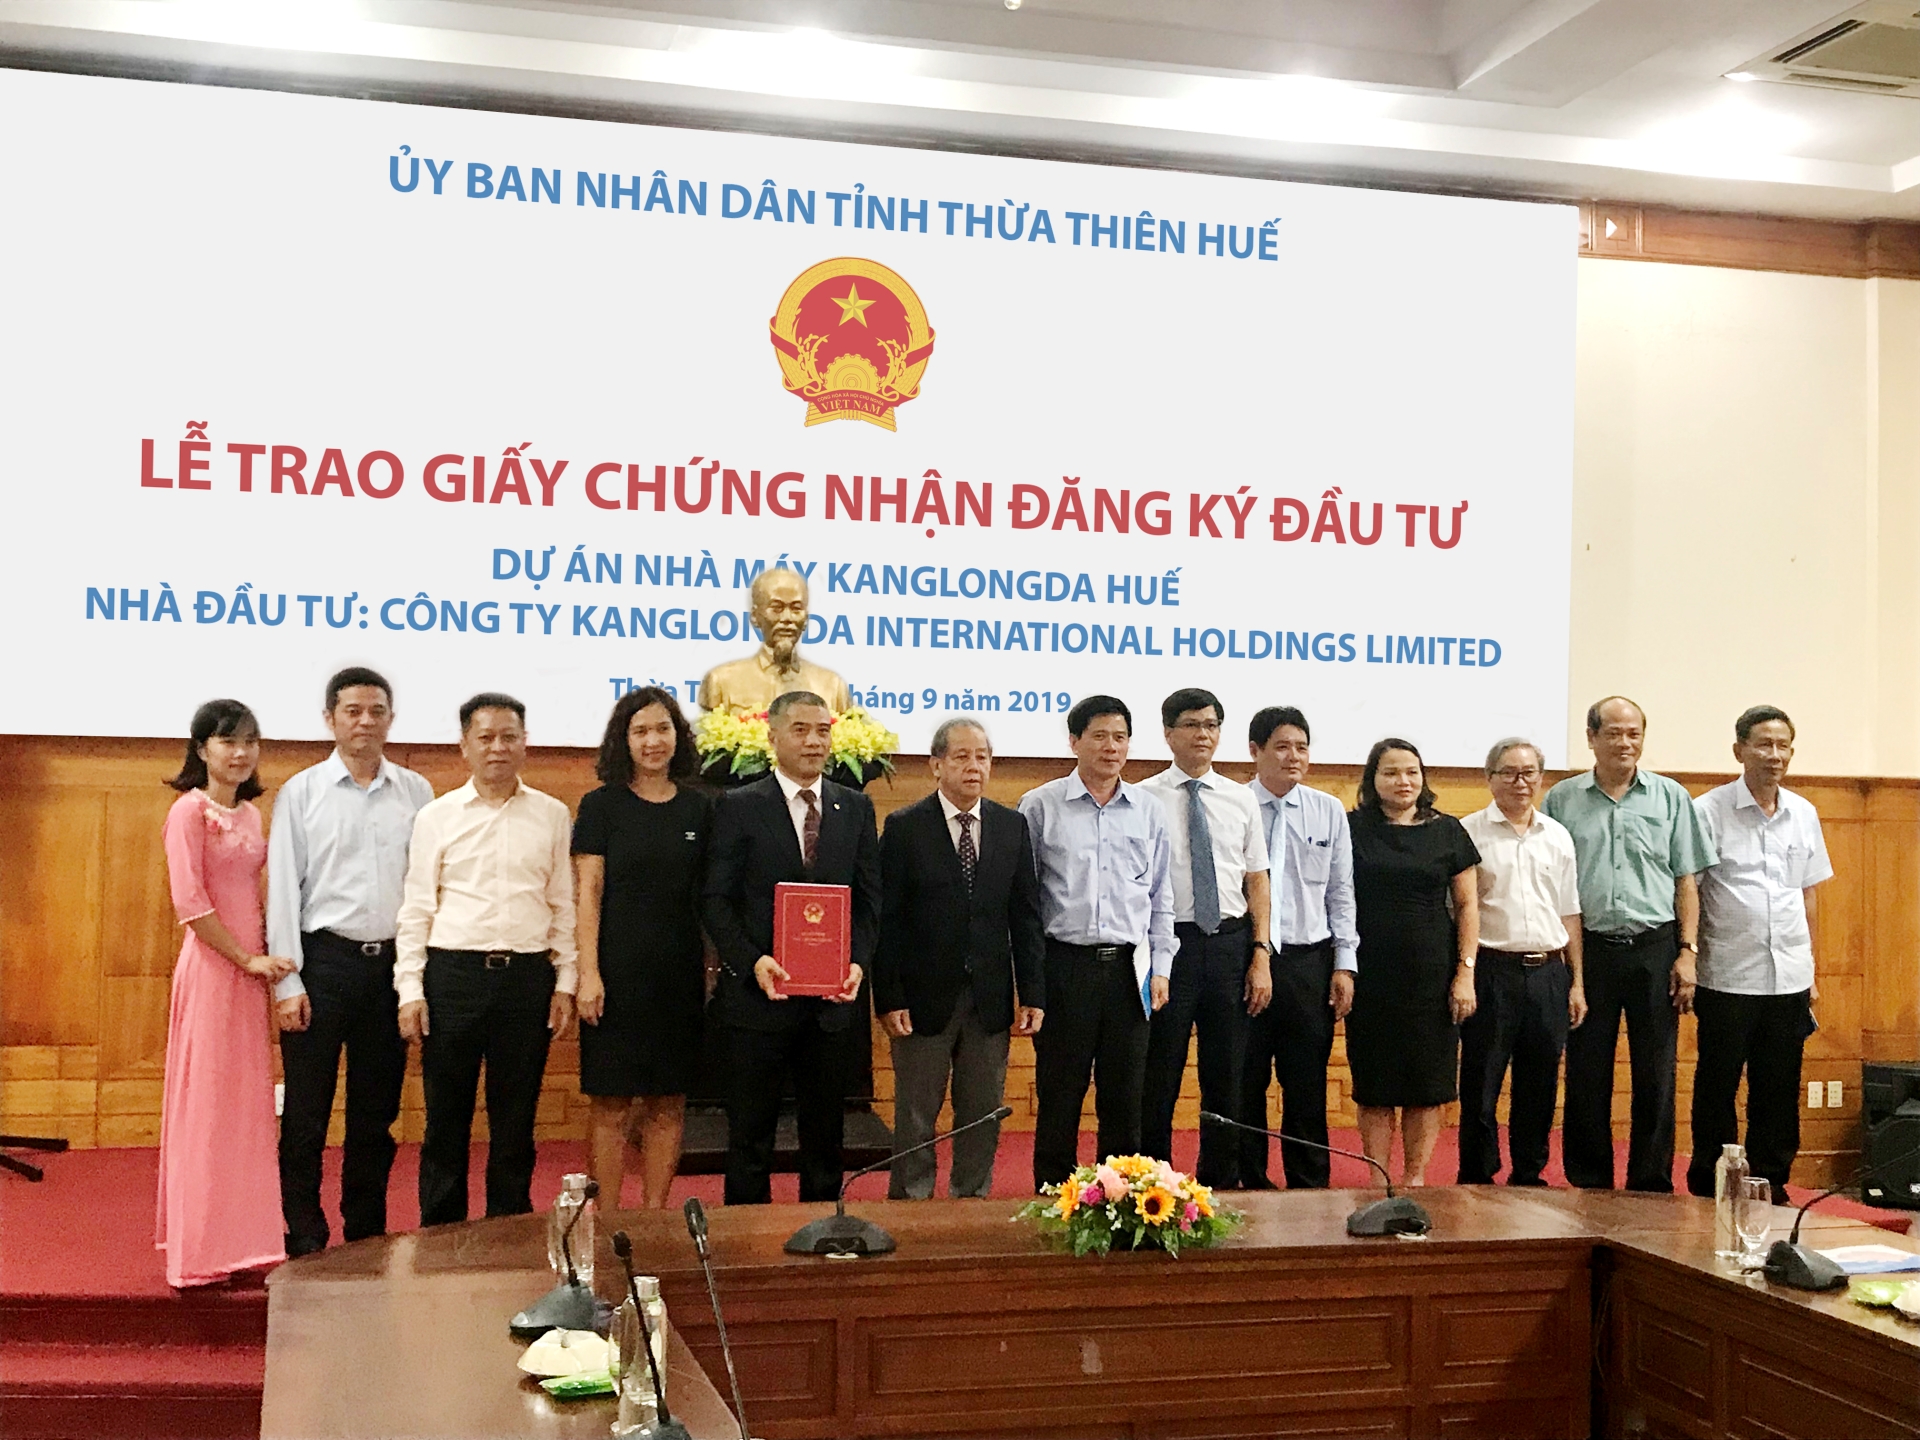 Thua Thien - Hue Province awarded Investment Registration Certificate for a 200-million USD project in Phong Dien Industrial Park (Viglacera)